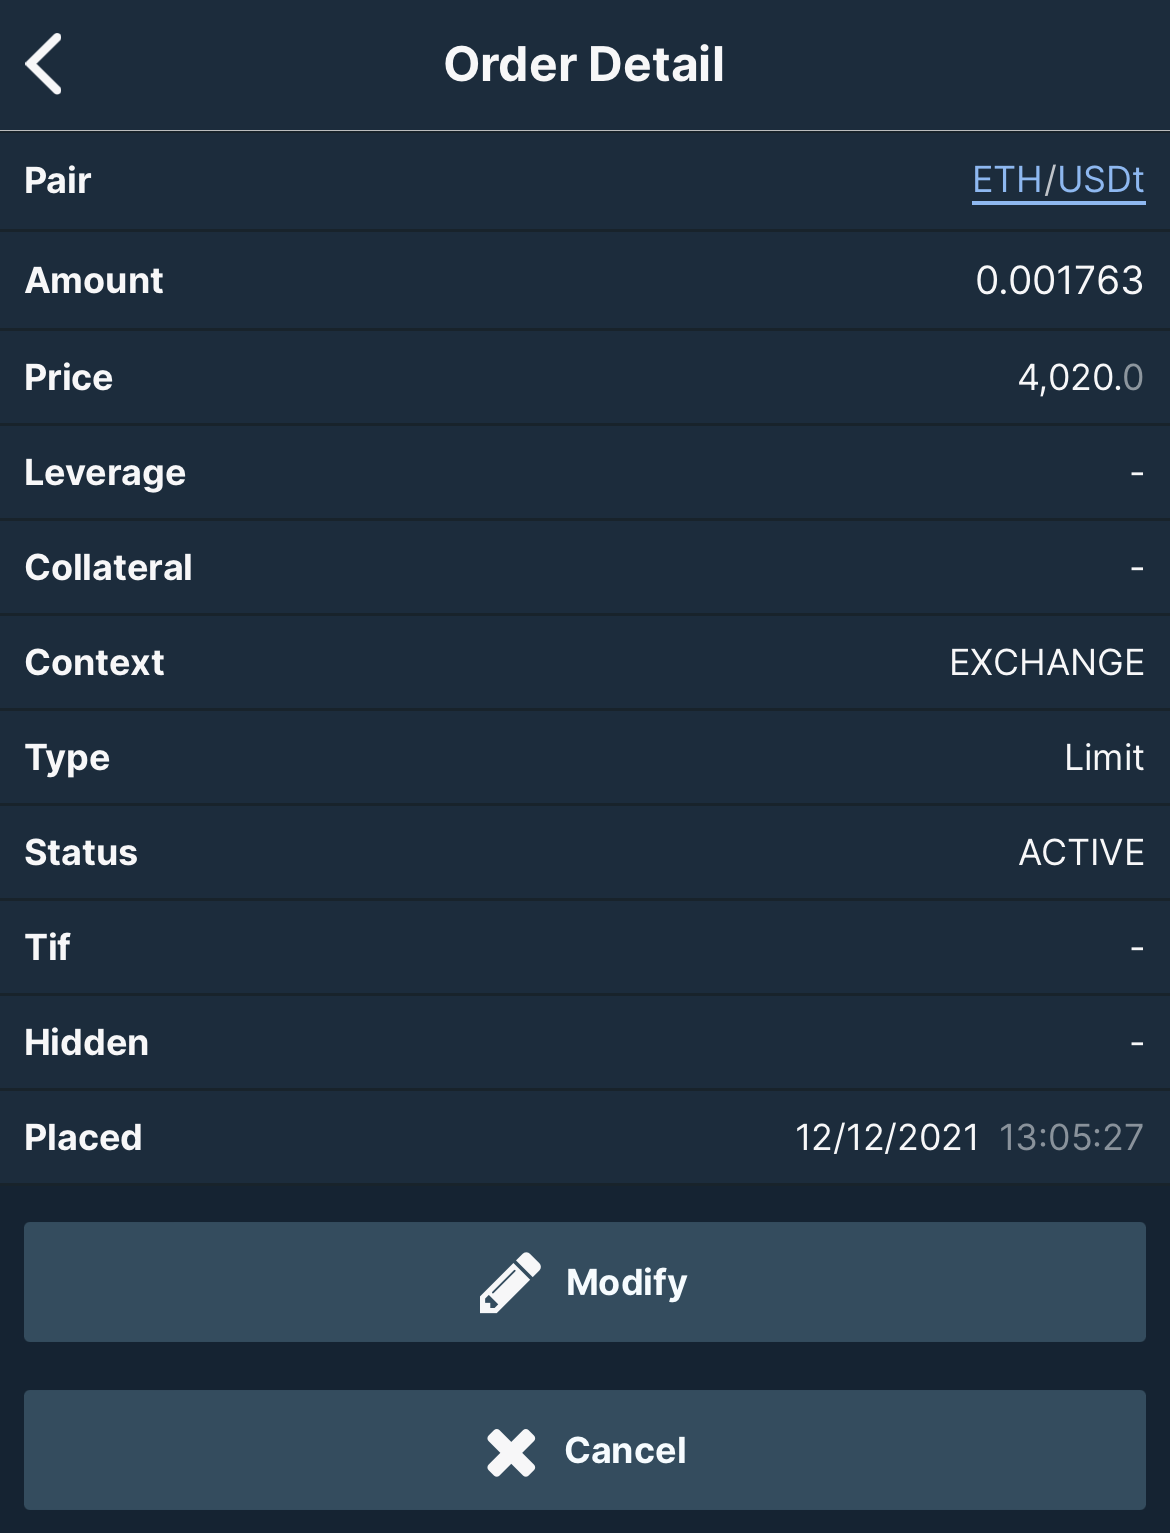 How_to_create_or_edit_orders_using_the_Bitfinex_Mobile_App6.PNG